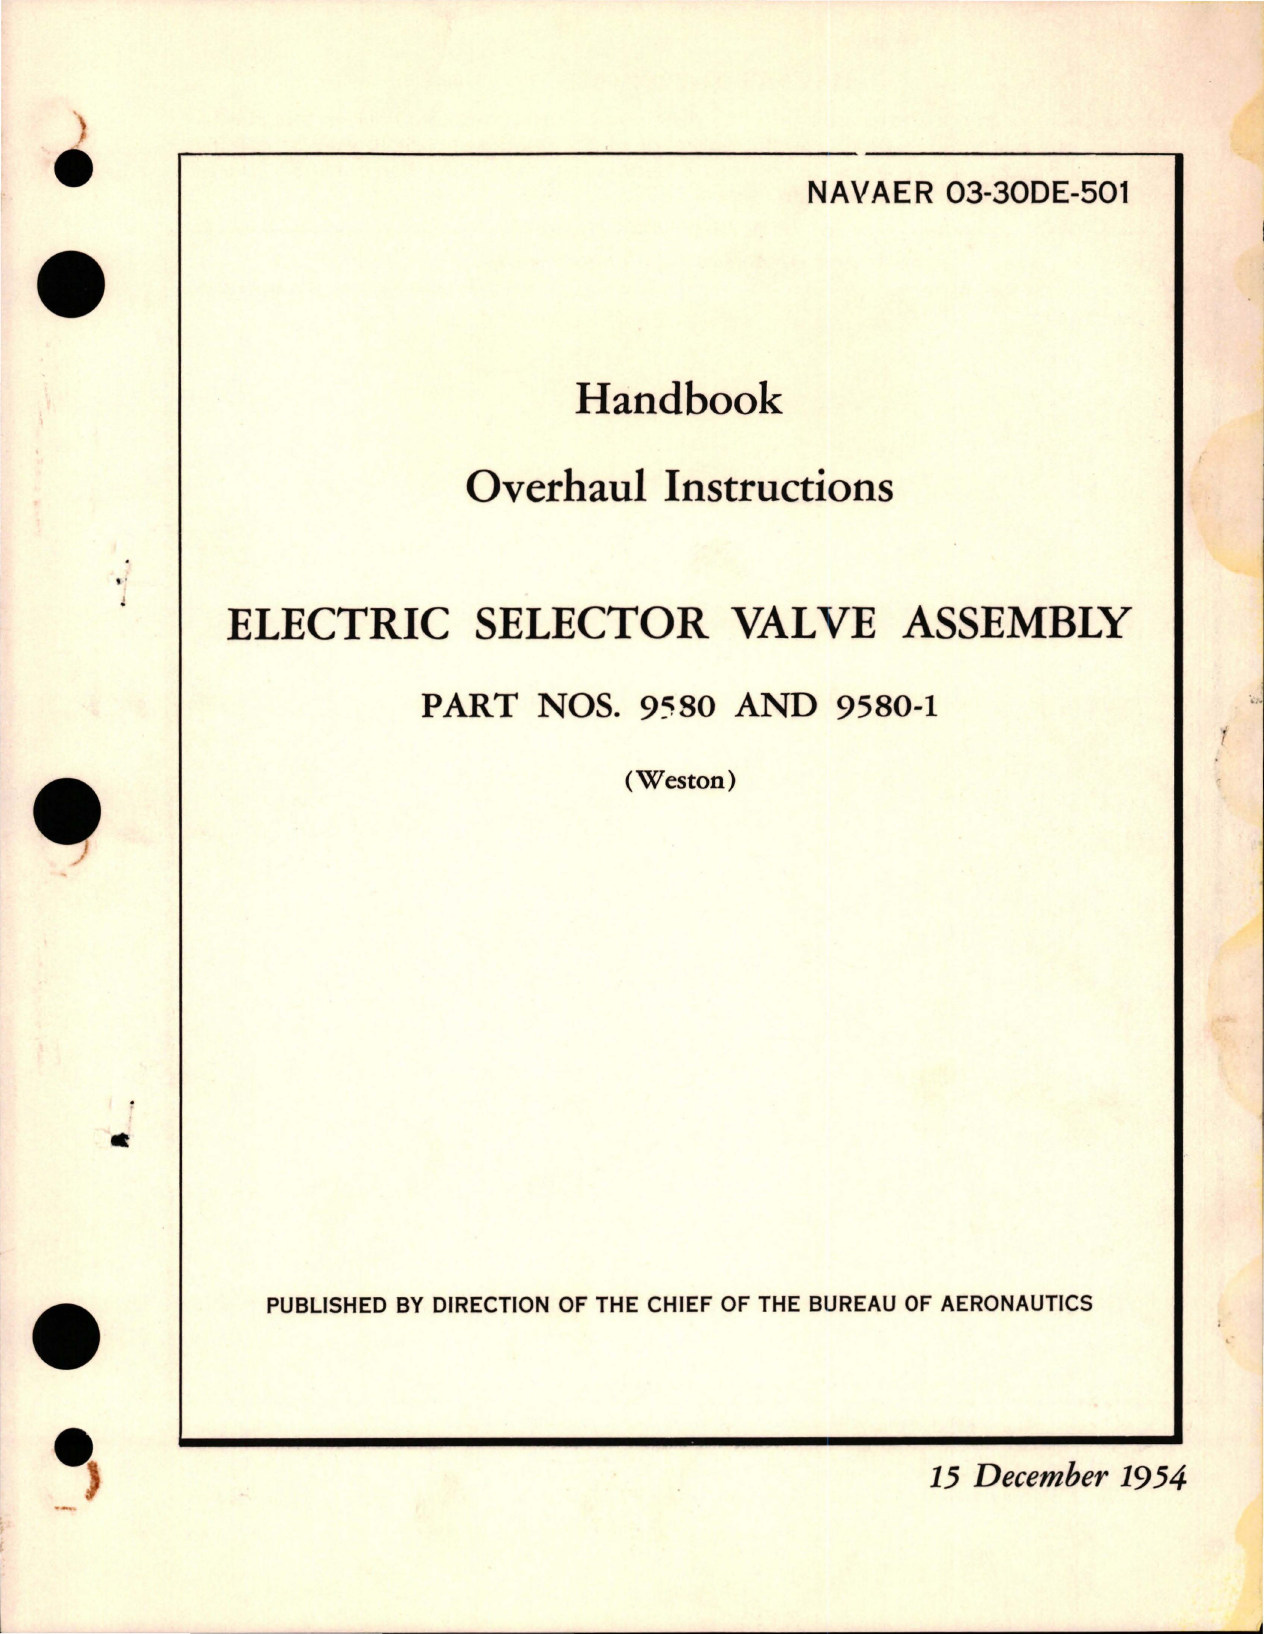 Sample page 1 from AirCorps Library document: Overhaul Instructions for Electric Selector Valve Assembly - Part 9580 and 9580-1